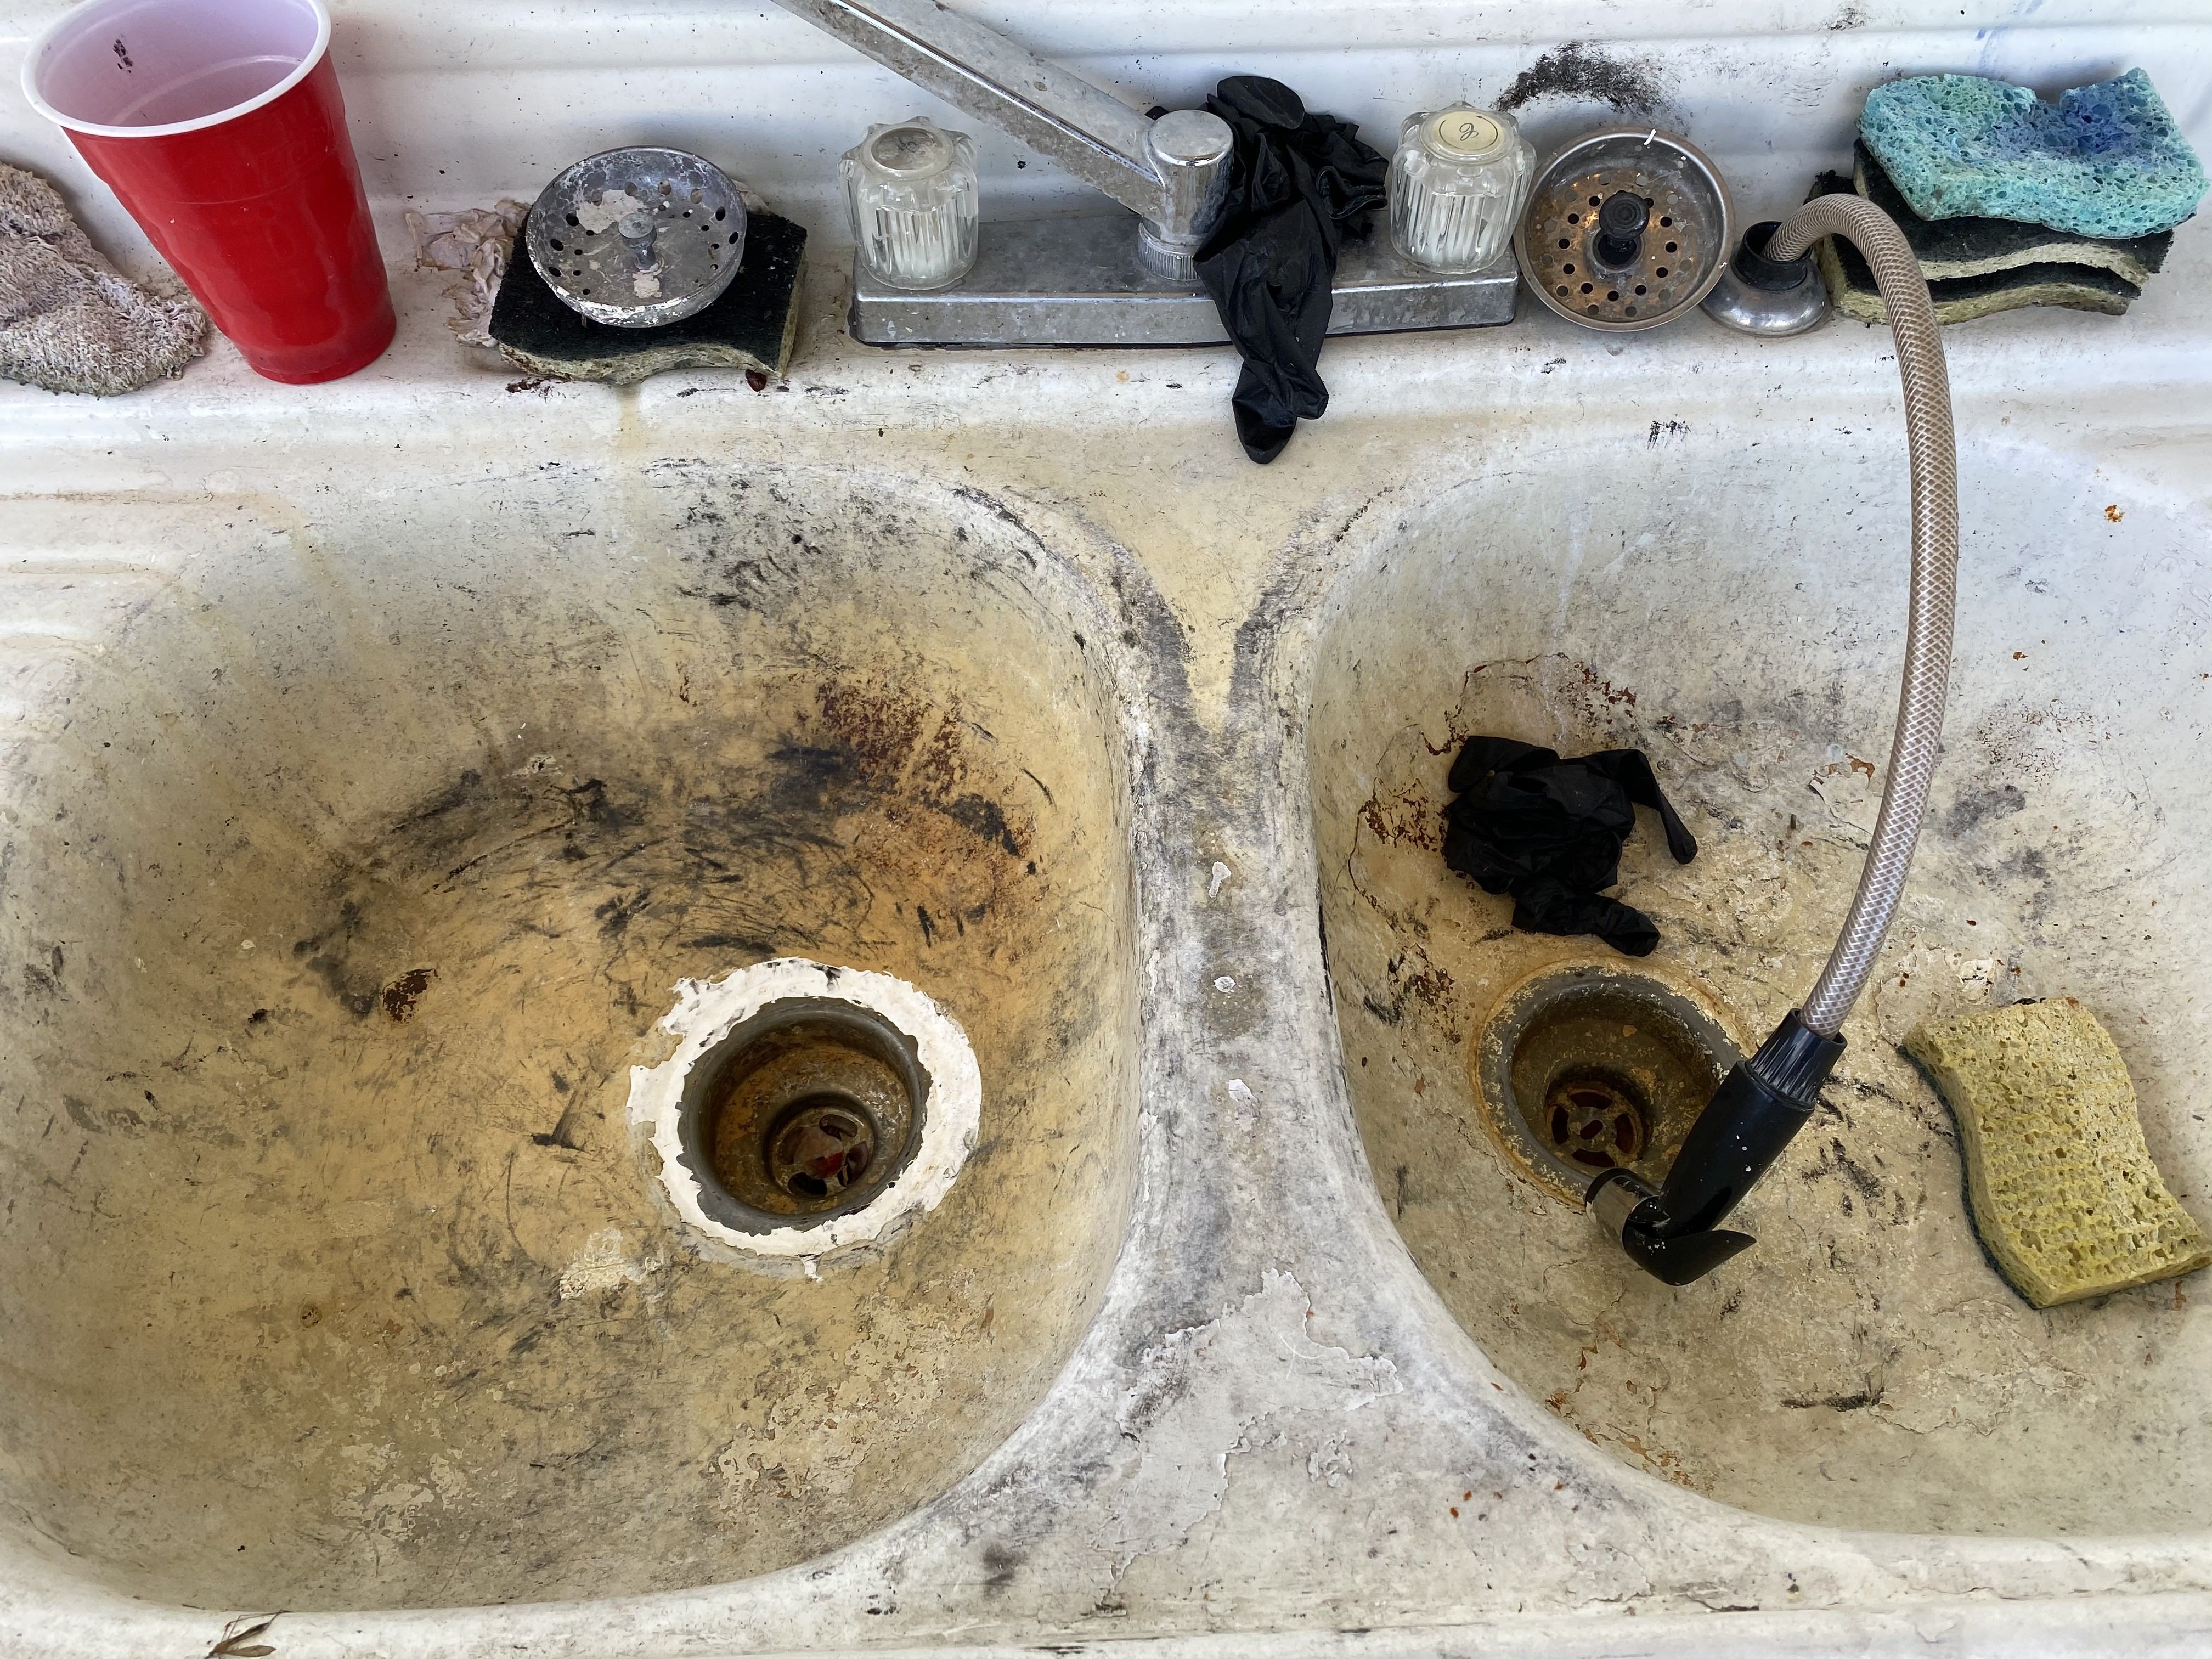 Pictured above are the sinks migrant farmworkers use while staying at the housing facility. Image by Areeba Shah. United States, 2020.